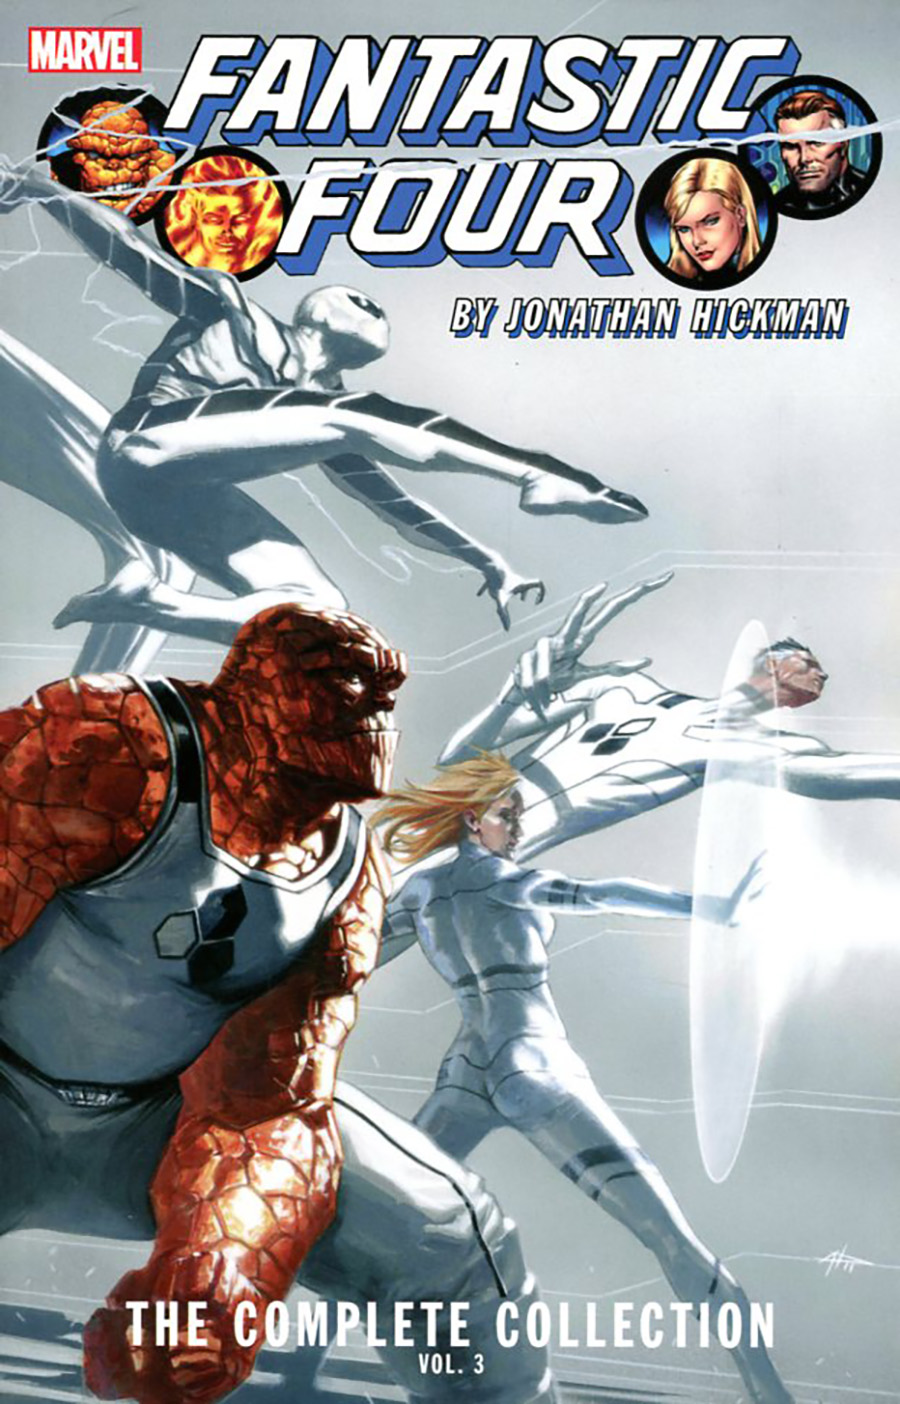 Fantastic Four By Jonathan Hickman Complete Collection Vol 3 TP